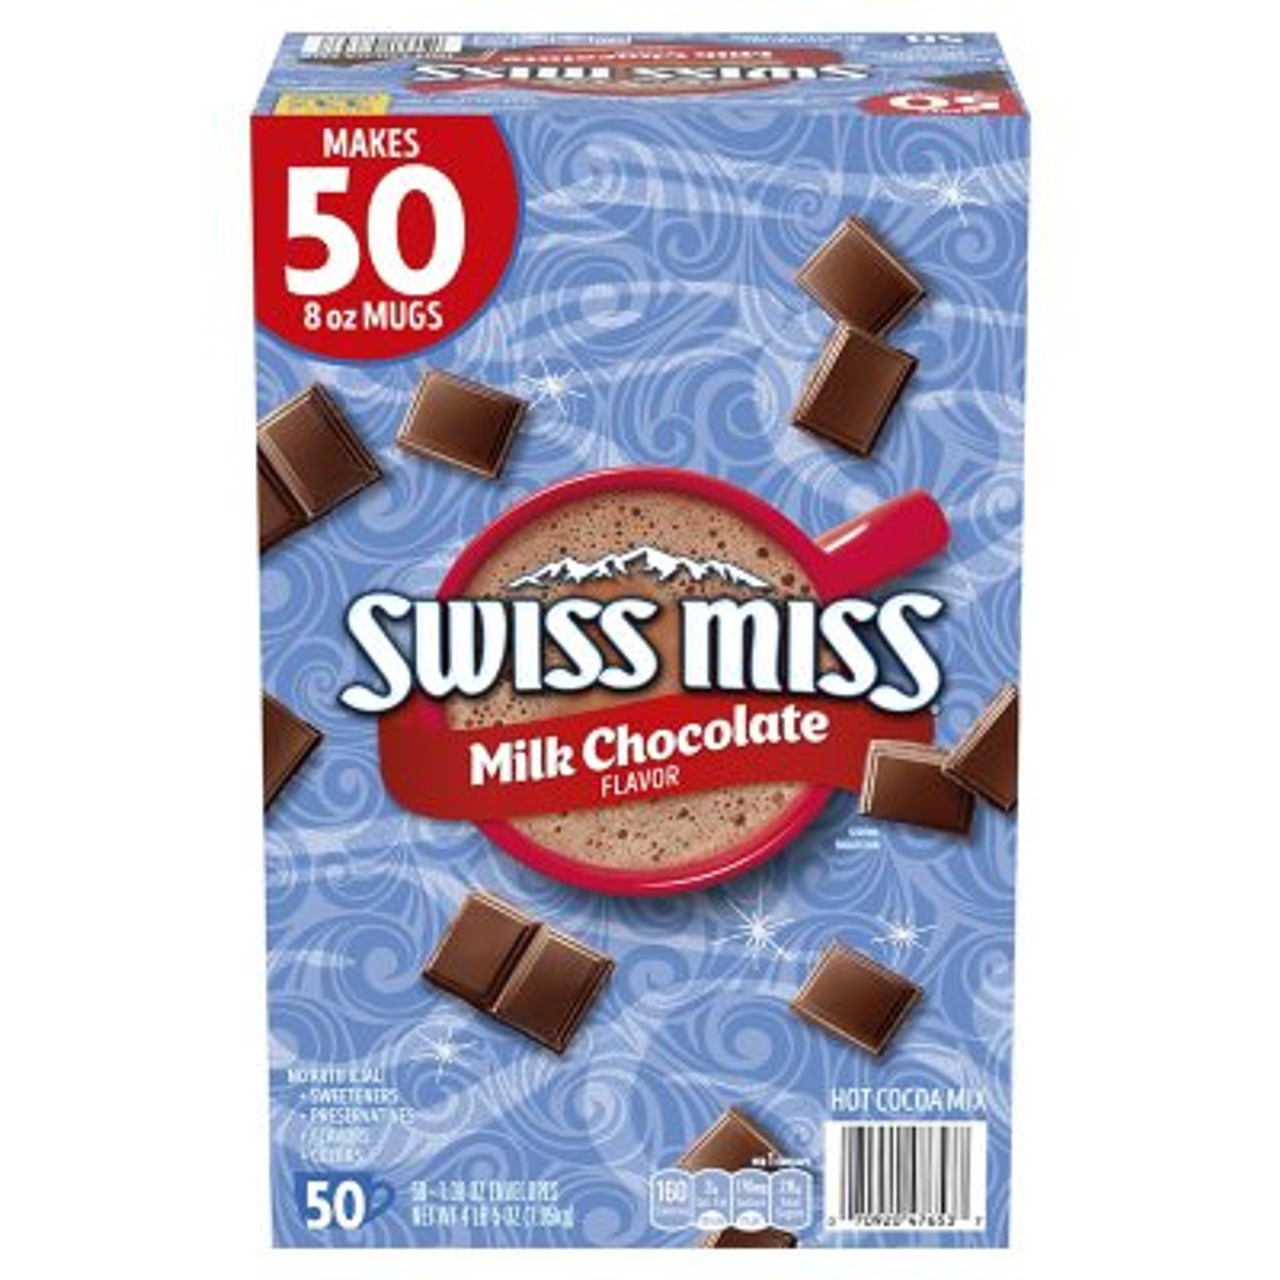 Swiss Miss Milk Chocolate Hot Cocoa Mix Packets (50 ct.) - [From 39.00 - Choose pk Qty ] - *Ships from Miami